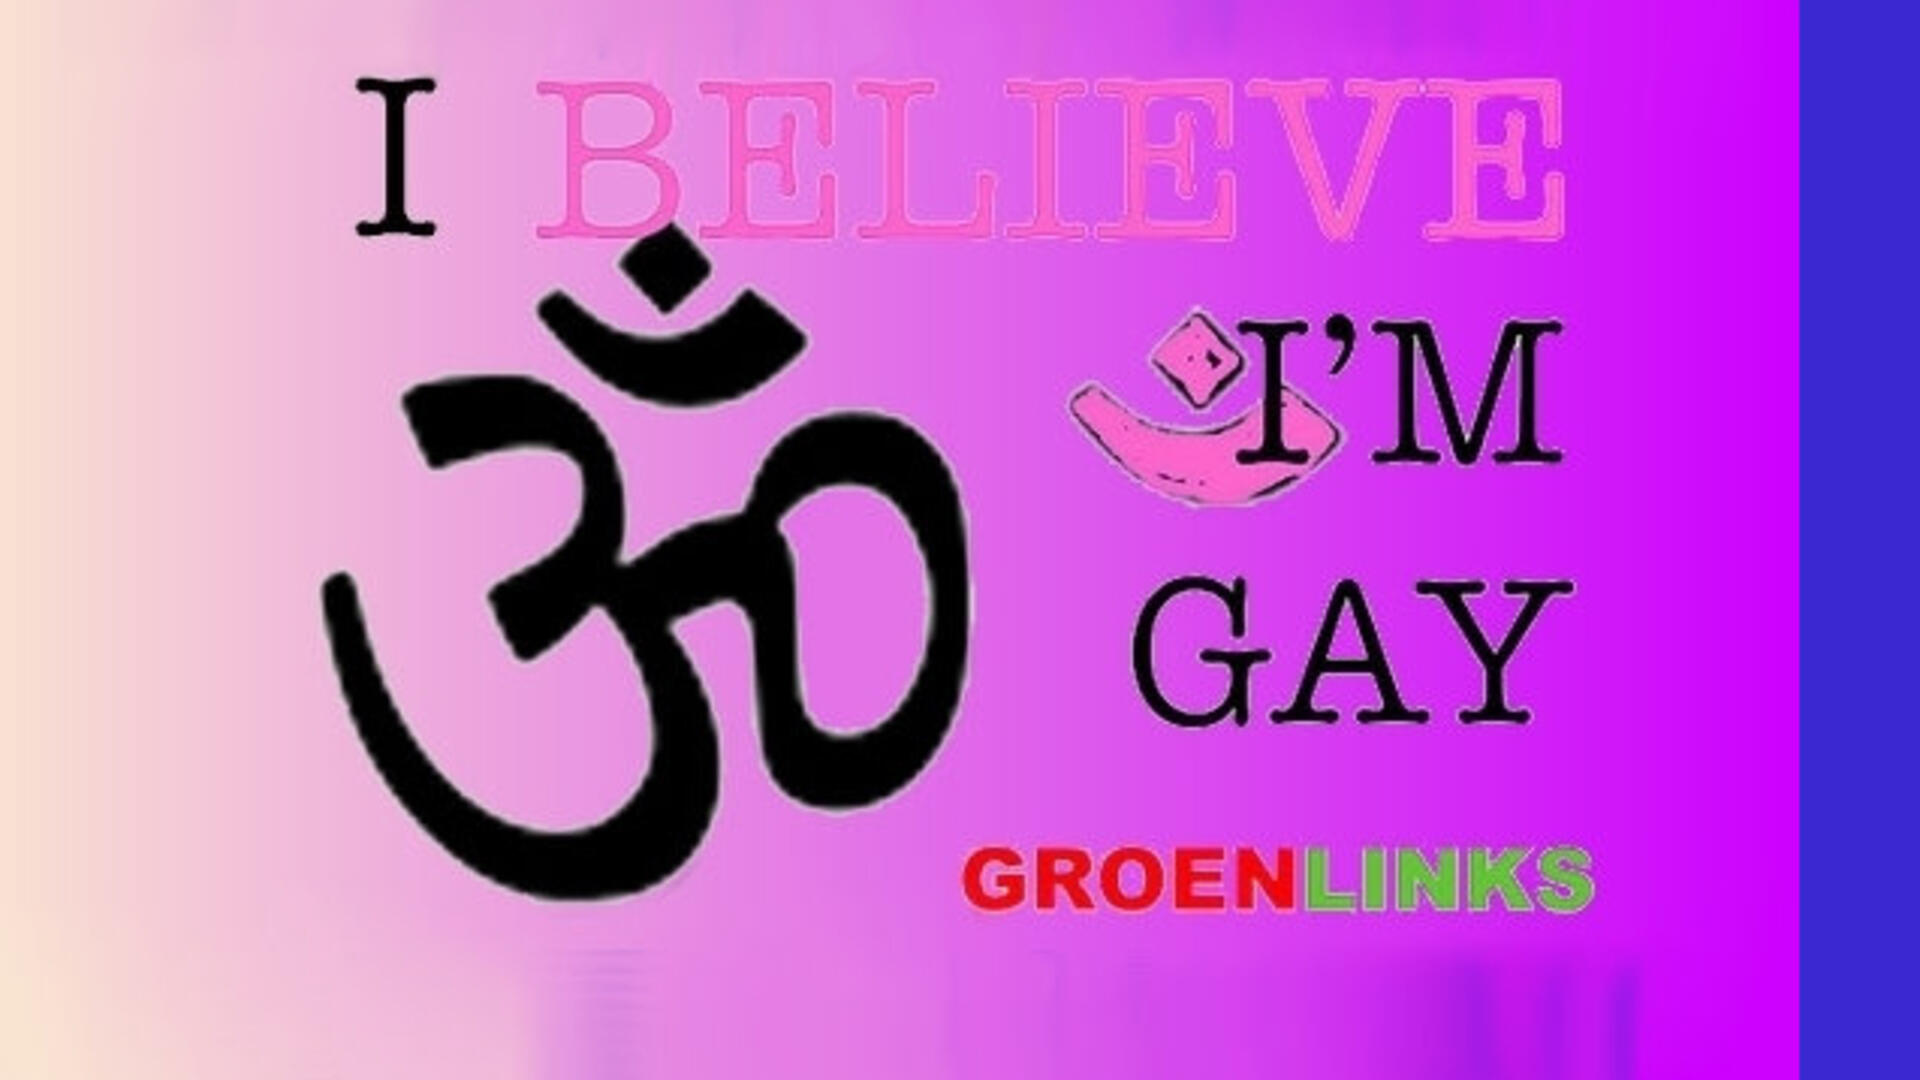 Poster I believe - I'm gay